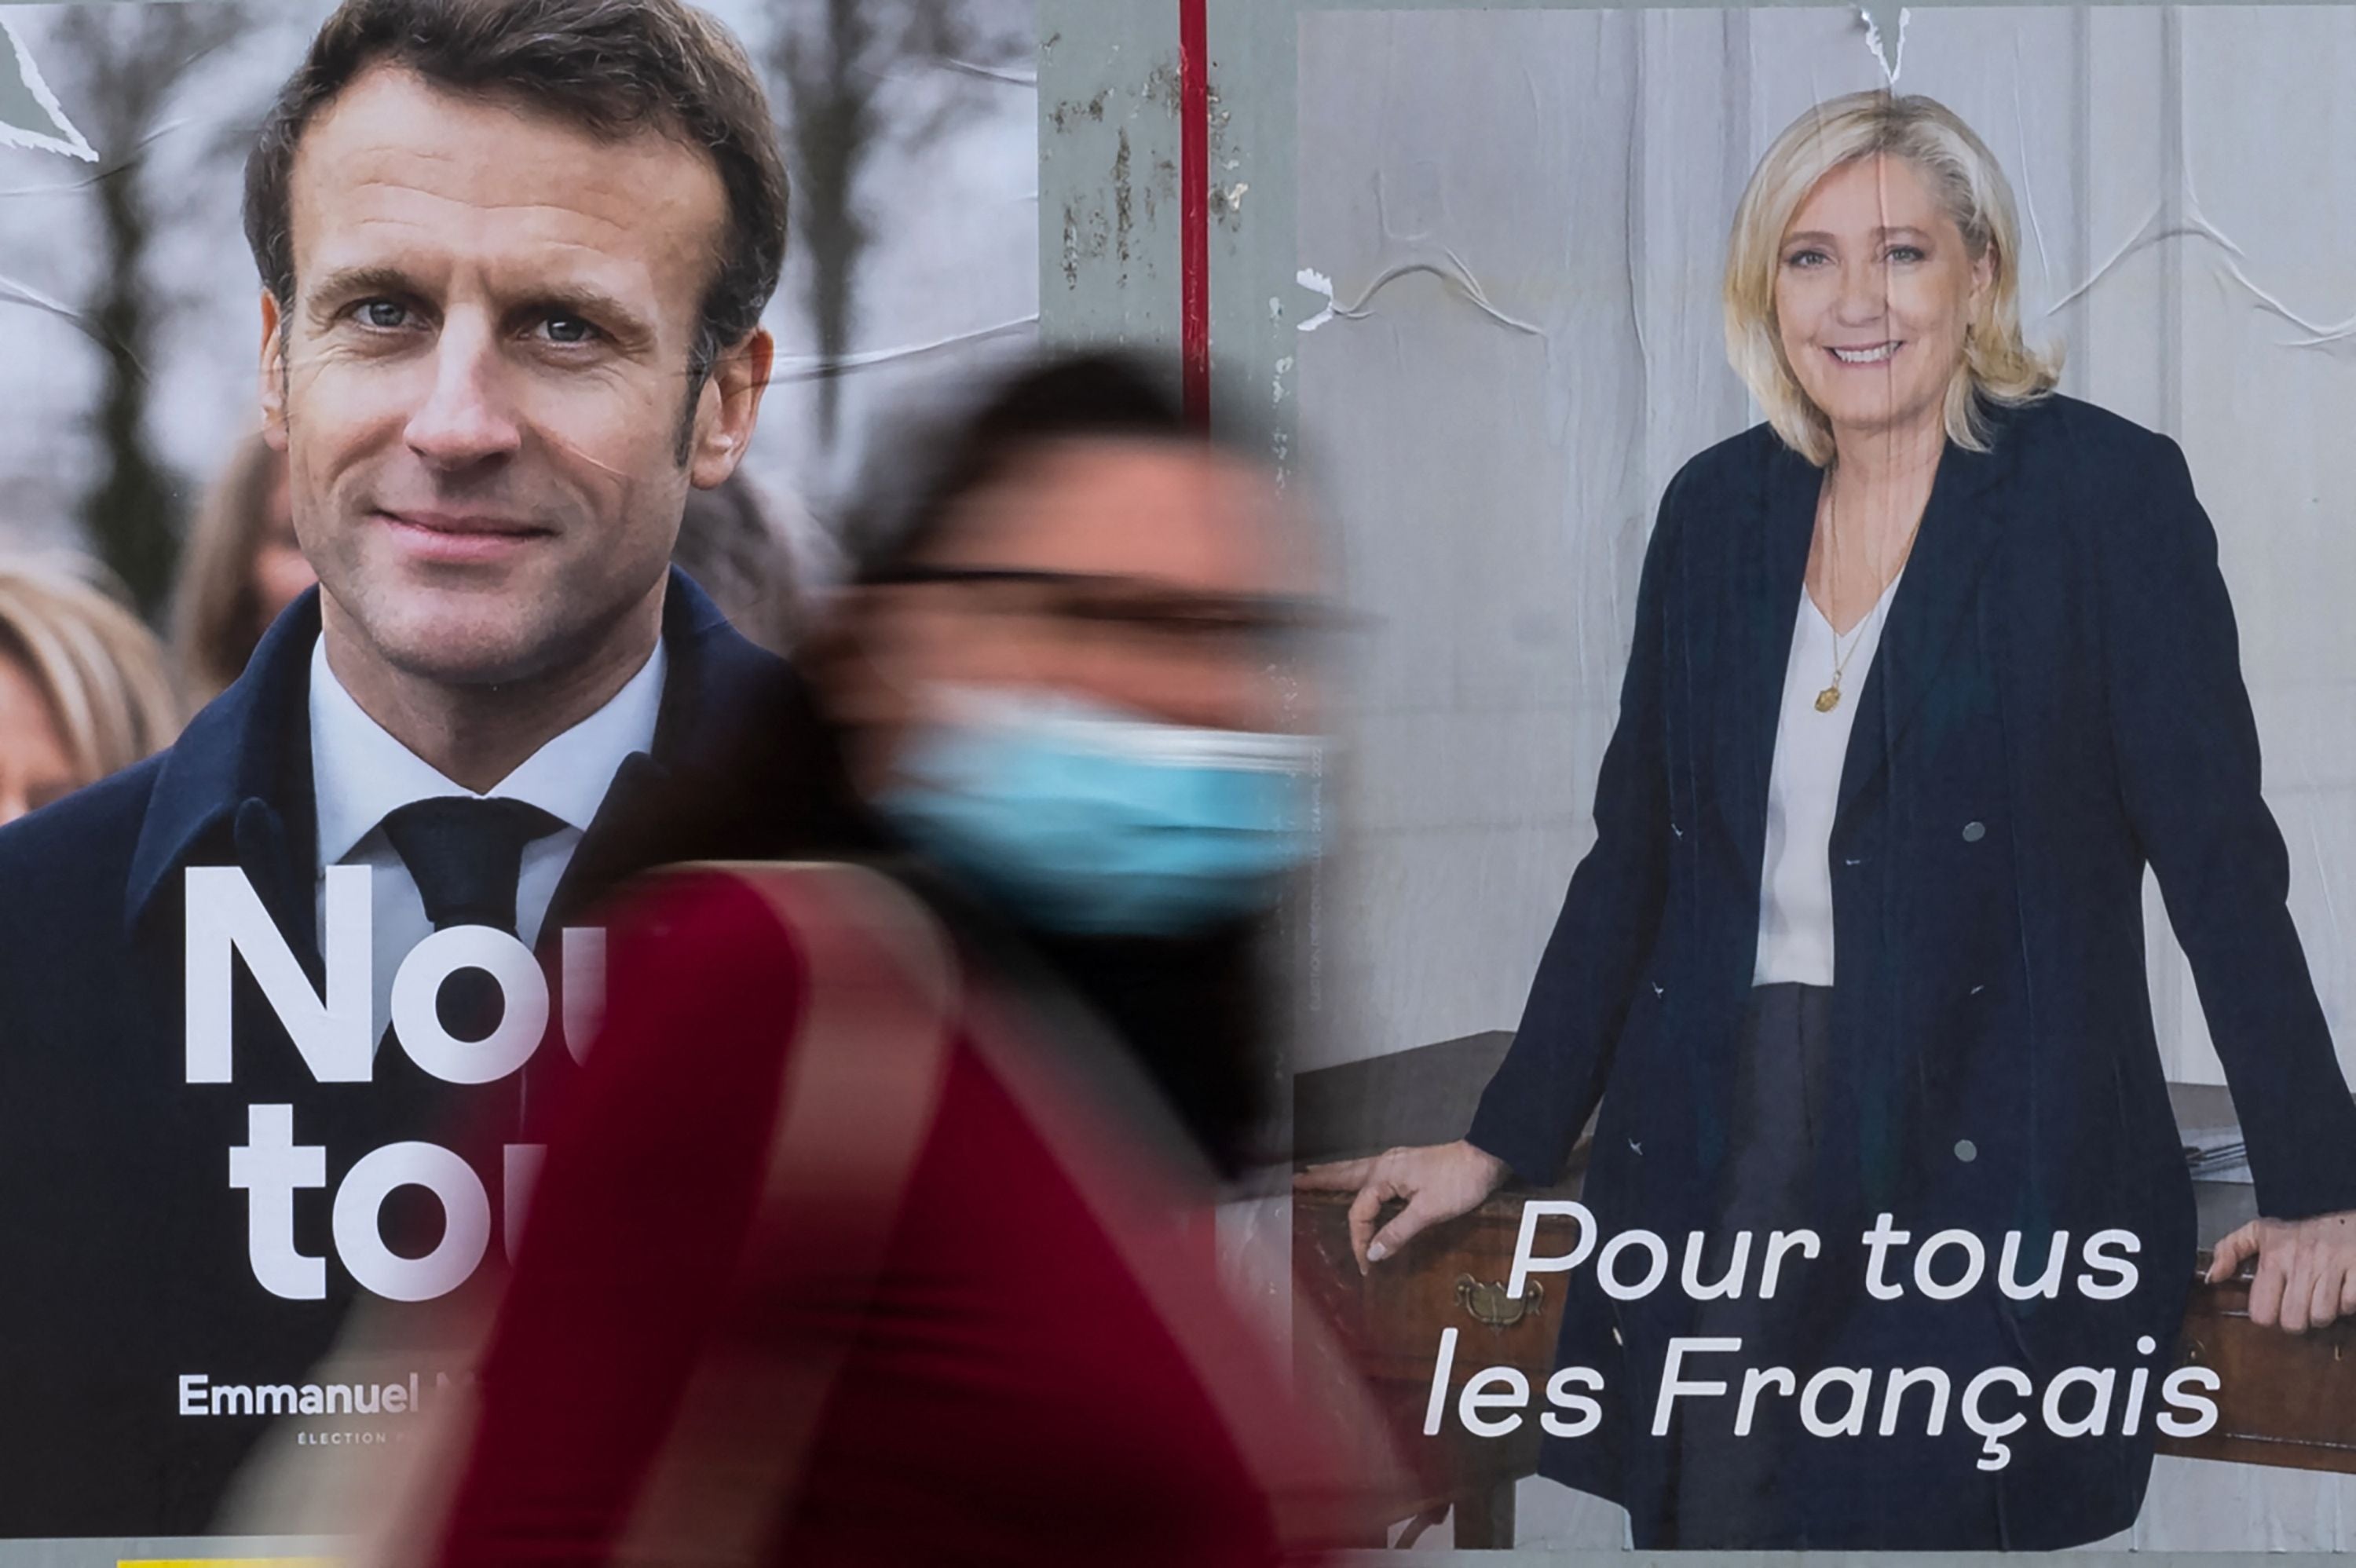 A woman passes by electoral campaign posters of Emmanuel Macron and Marine Le Pen